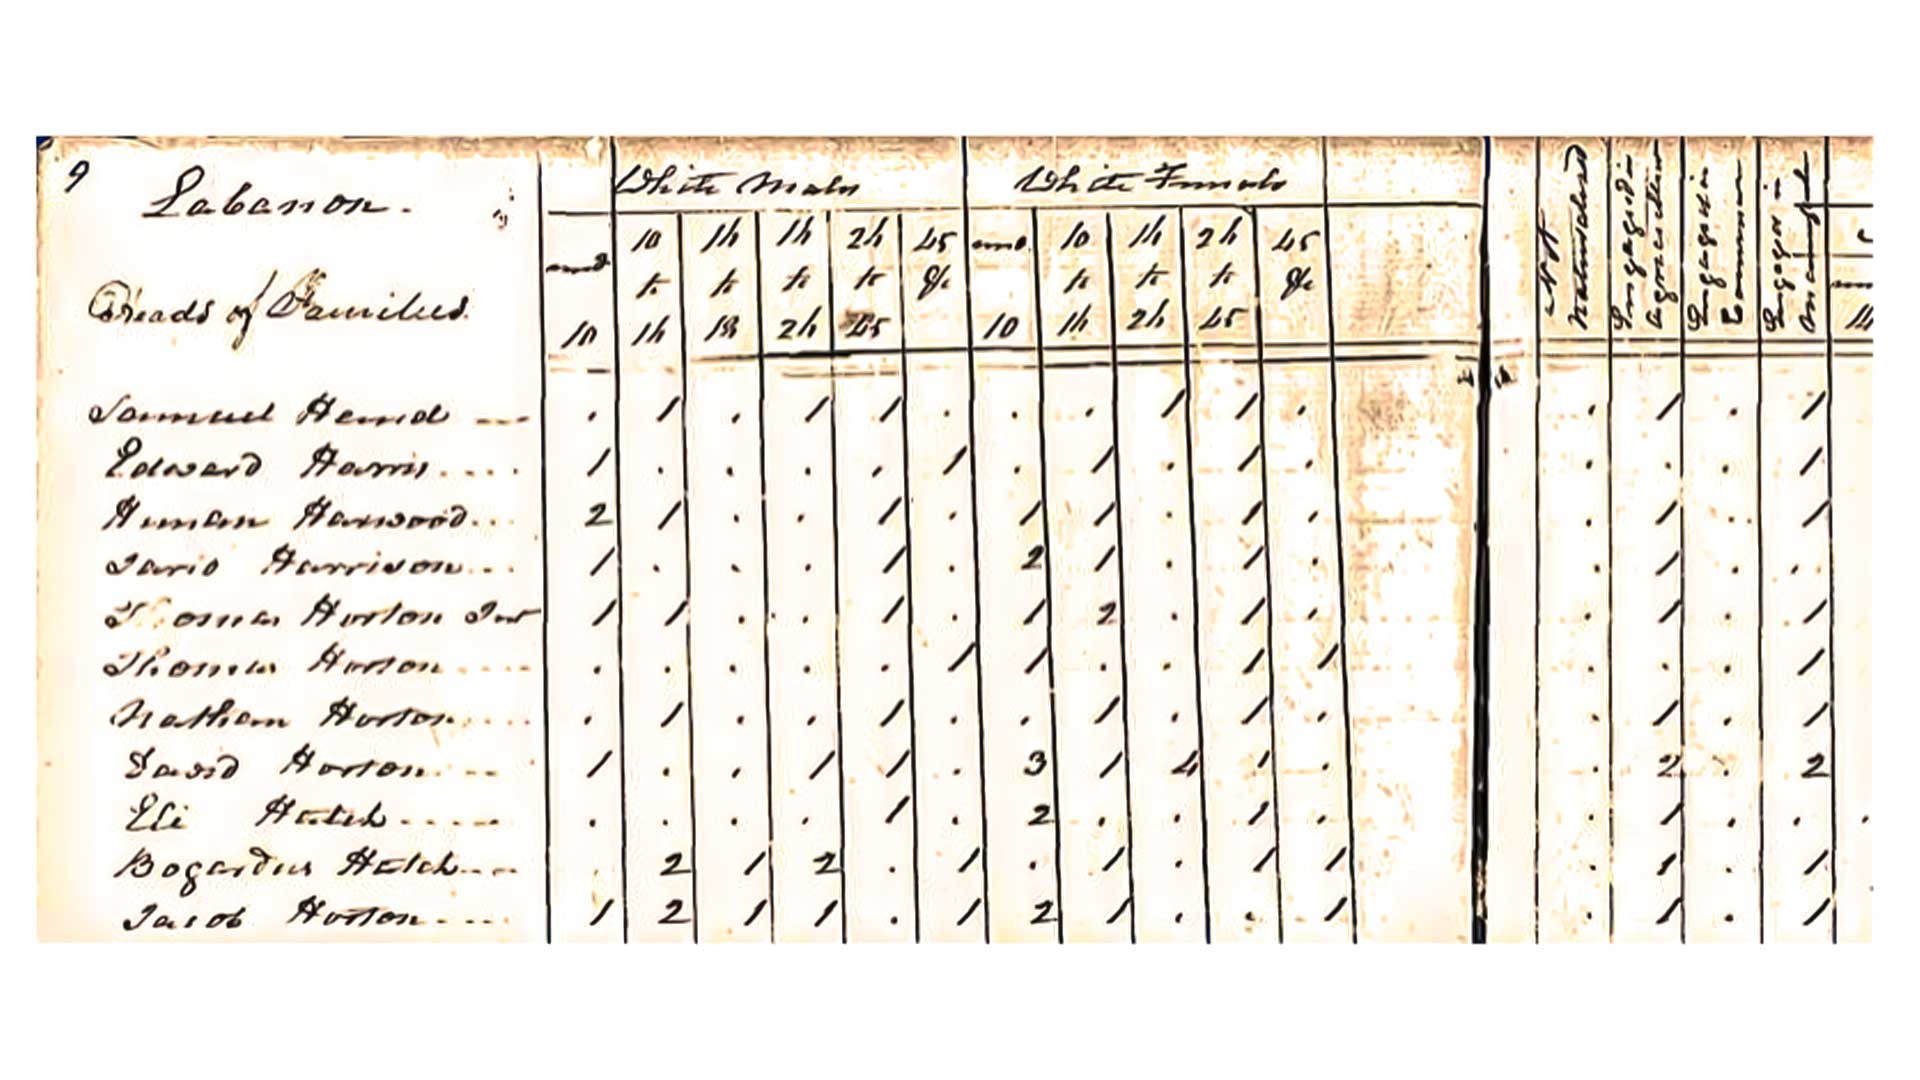 The 1820 US Federal Census — A Closer Look